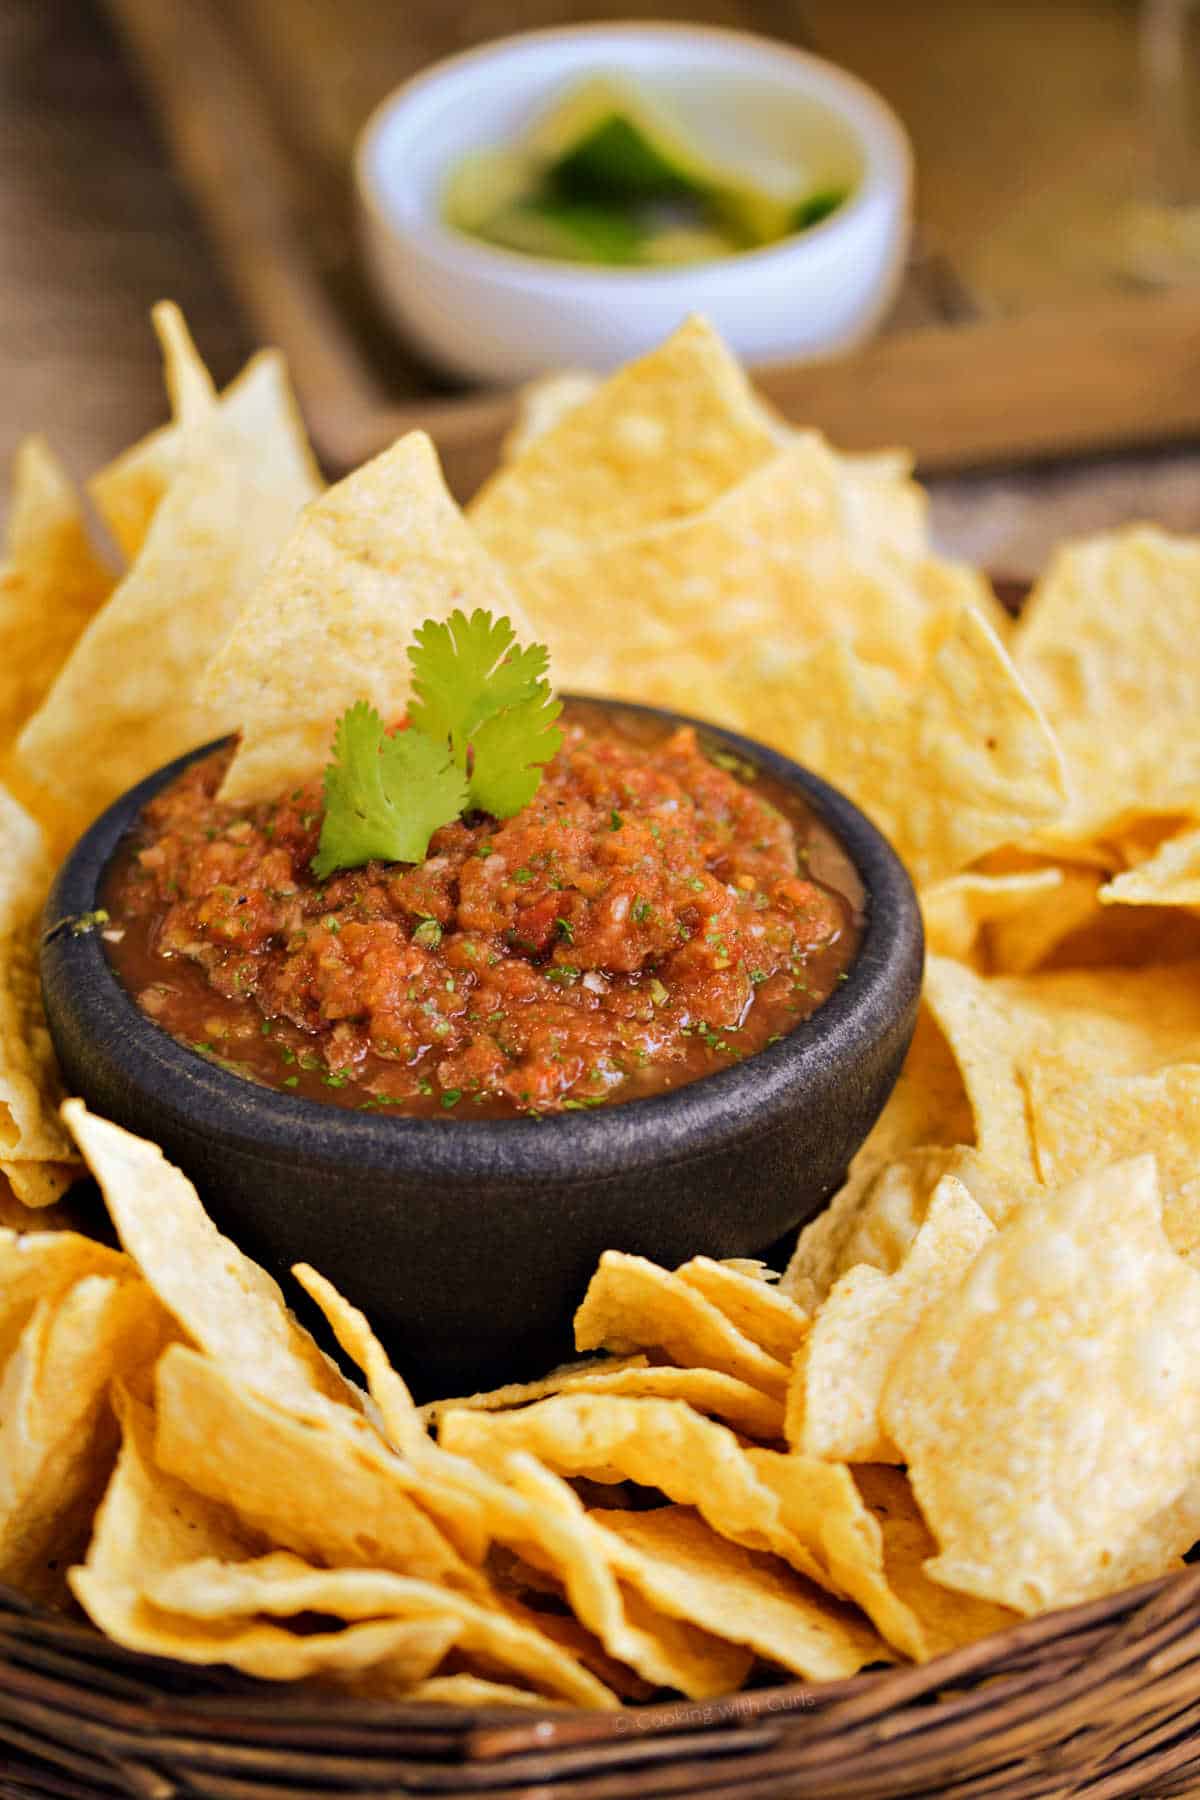 Restaurant style blender salsa surrounded by tortilla chips.